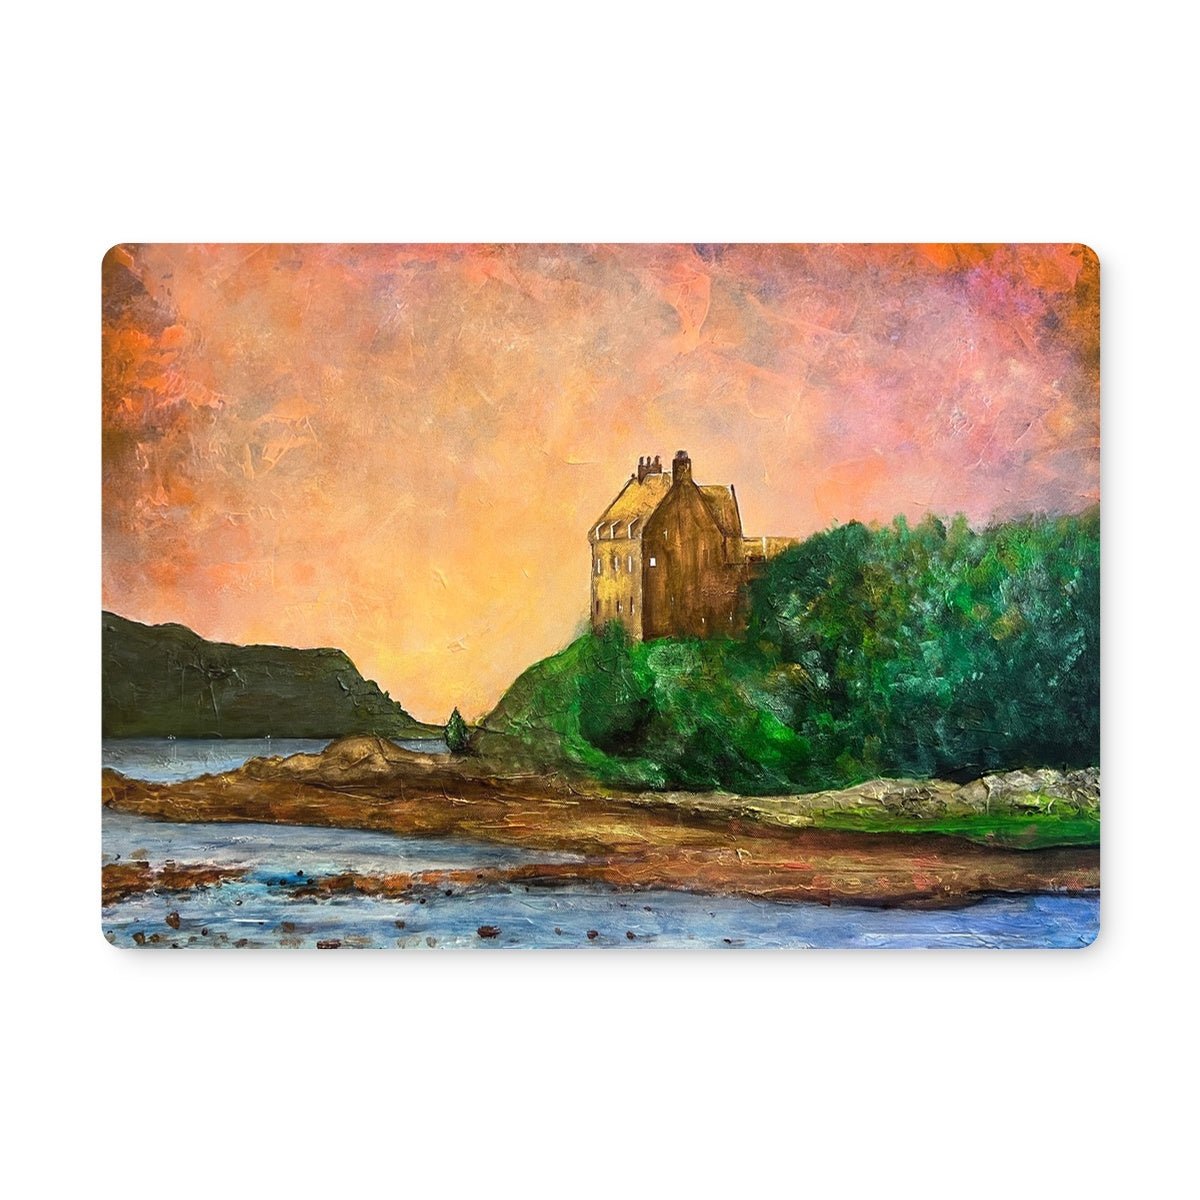 Duntrune Castle Art Gifts Placemat-Placemats-Scottish Castles Art Gallery-2 Placemats-Paintings, Prints, Homeware, Art Gifts From Scotland By Scottish Artist Kevin Hunter